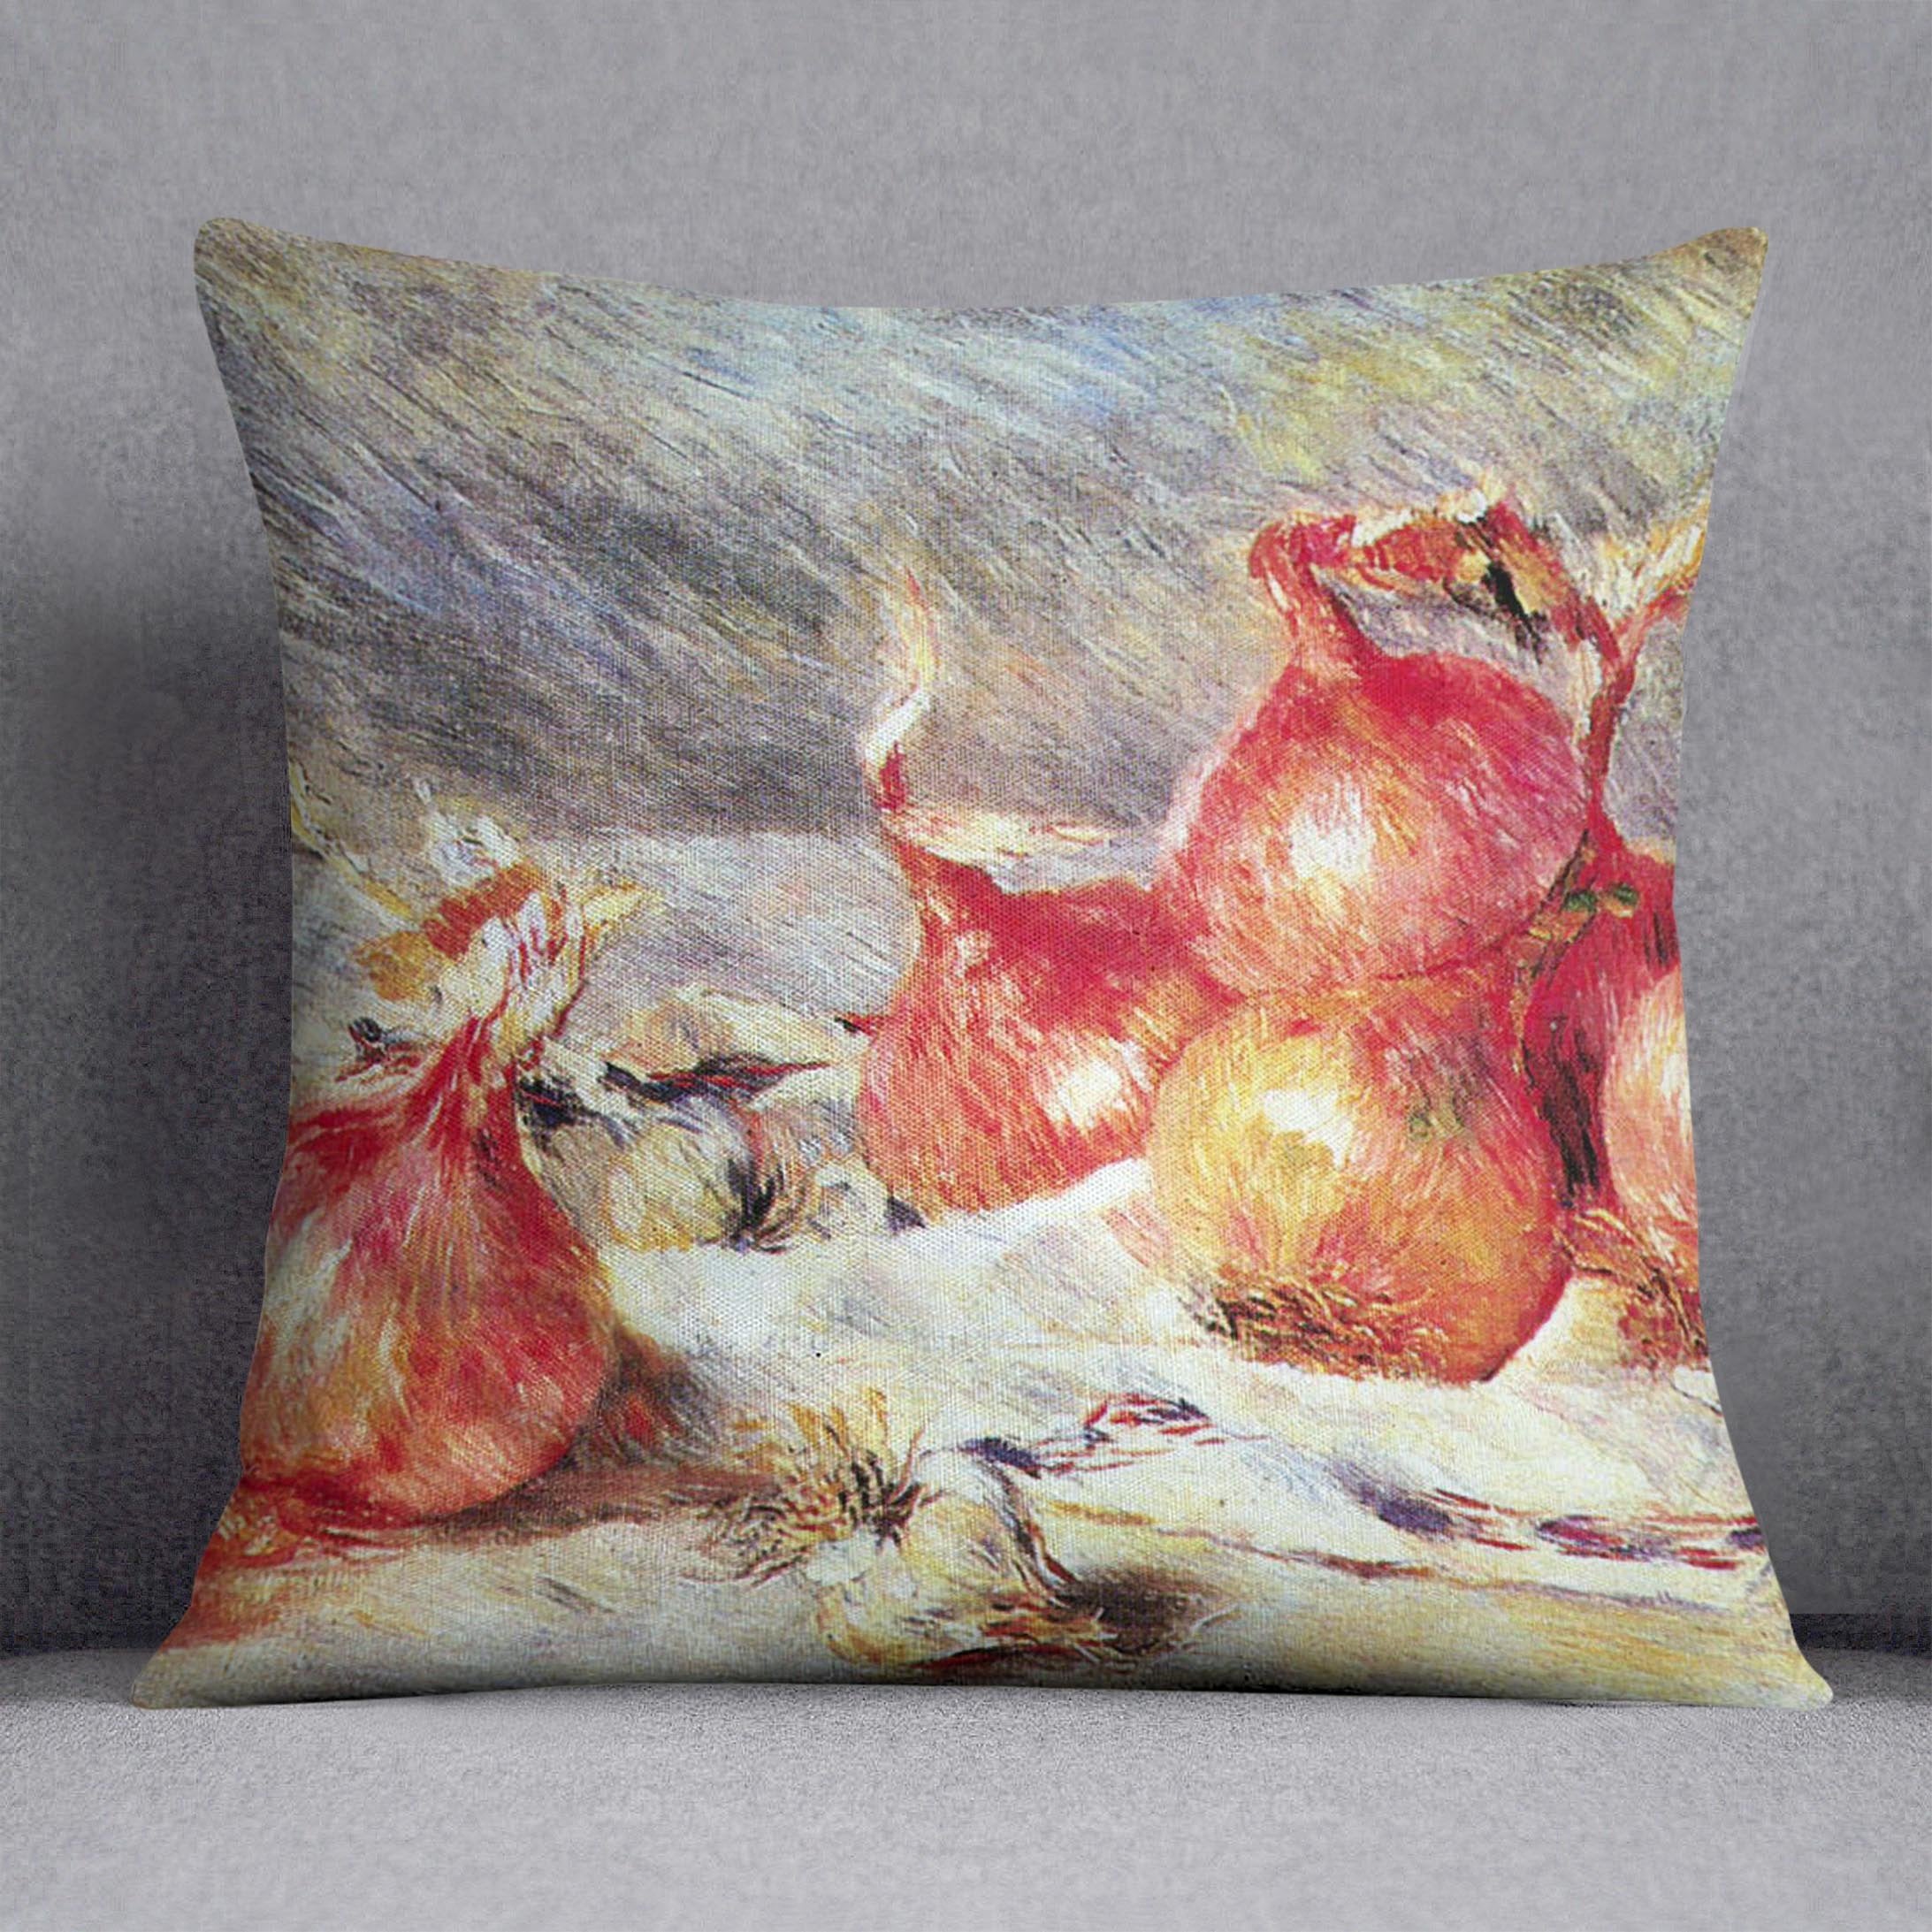 Onions by Renoir Throw Pillow